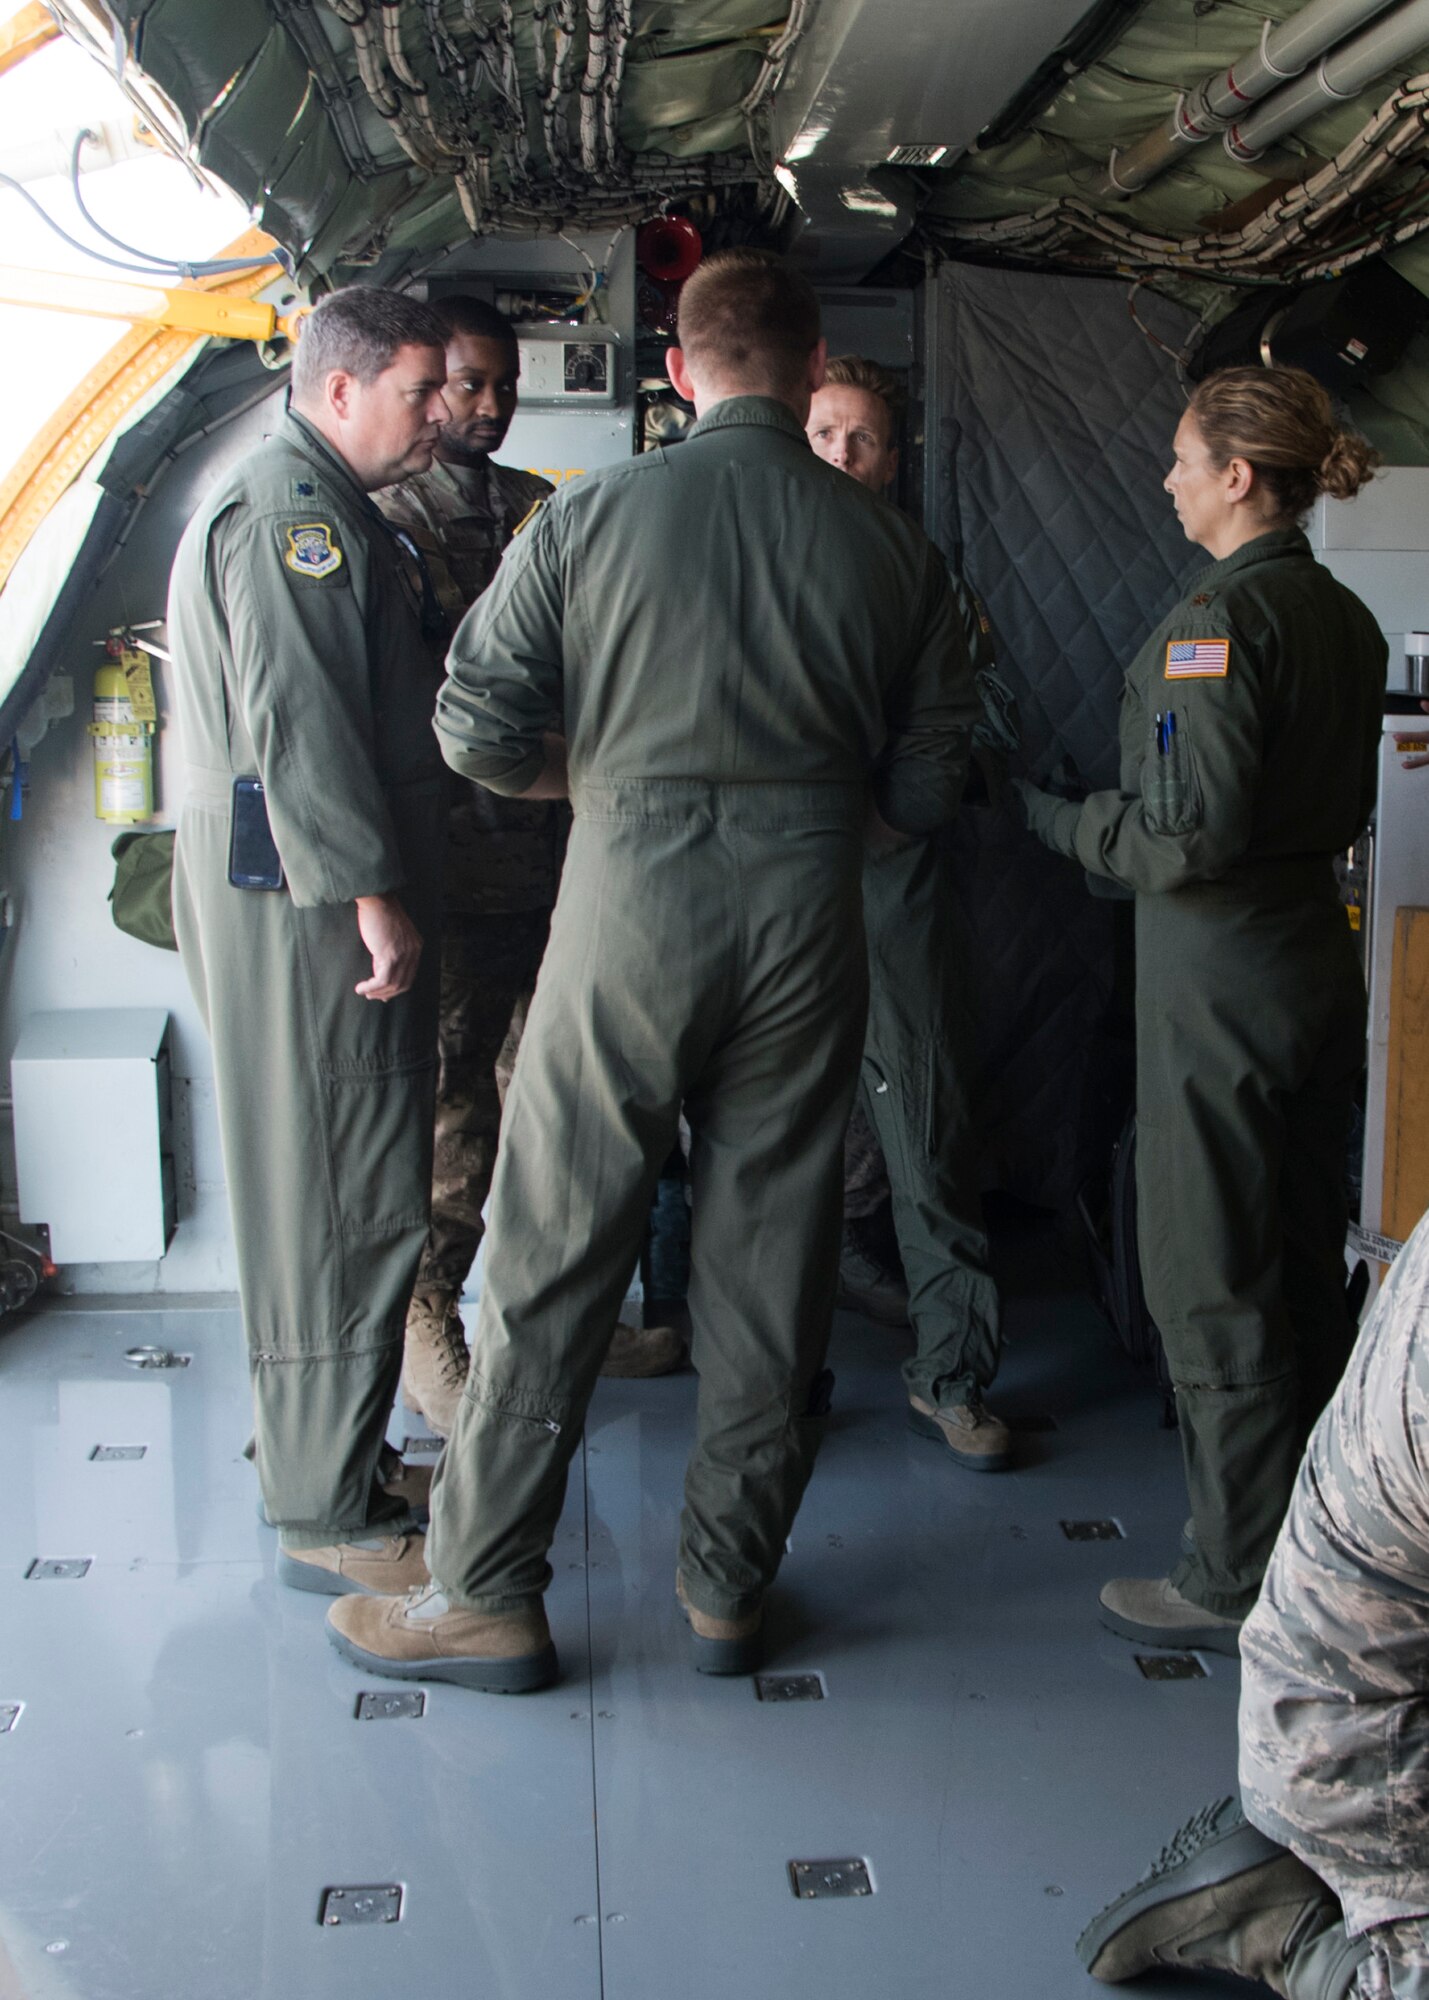 Maj. Kristina George, 459 Aeromedical Evacuation Squadron flight nurse examiner (right), evaluates Capt. Joseph Dabbs, medical crew director, during a pilot brief prior to taking off for an off station trainer on a KC-135 Stratotanker, Sept. 20, 2019 at Joint Base Andrews, Md. The AES team participates in local and off station training missions about twice a month to ensure humanitarian and deployment mission readiness. (U.S. Air Force photo by Staff Sgt. Cierra Presentado/Released)